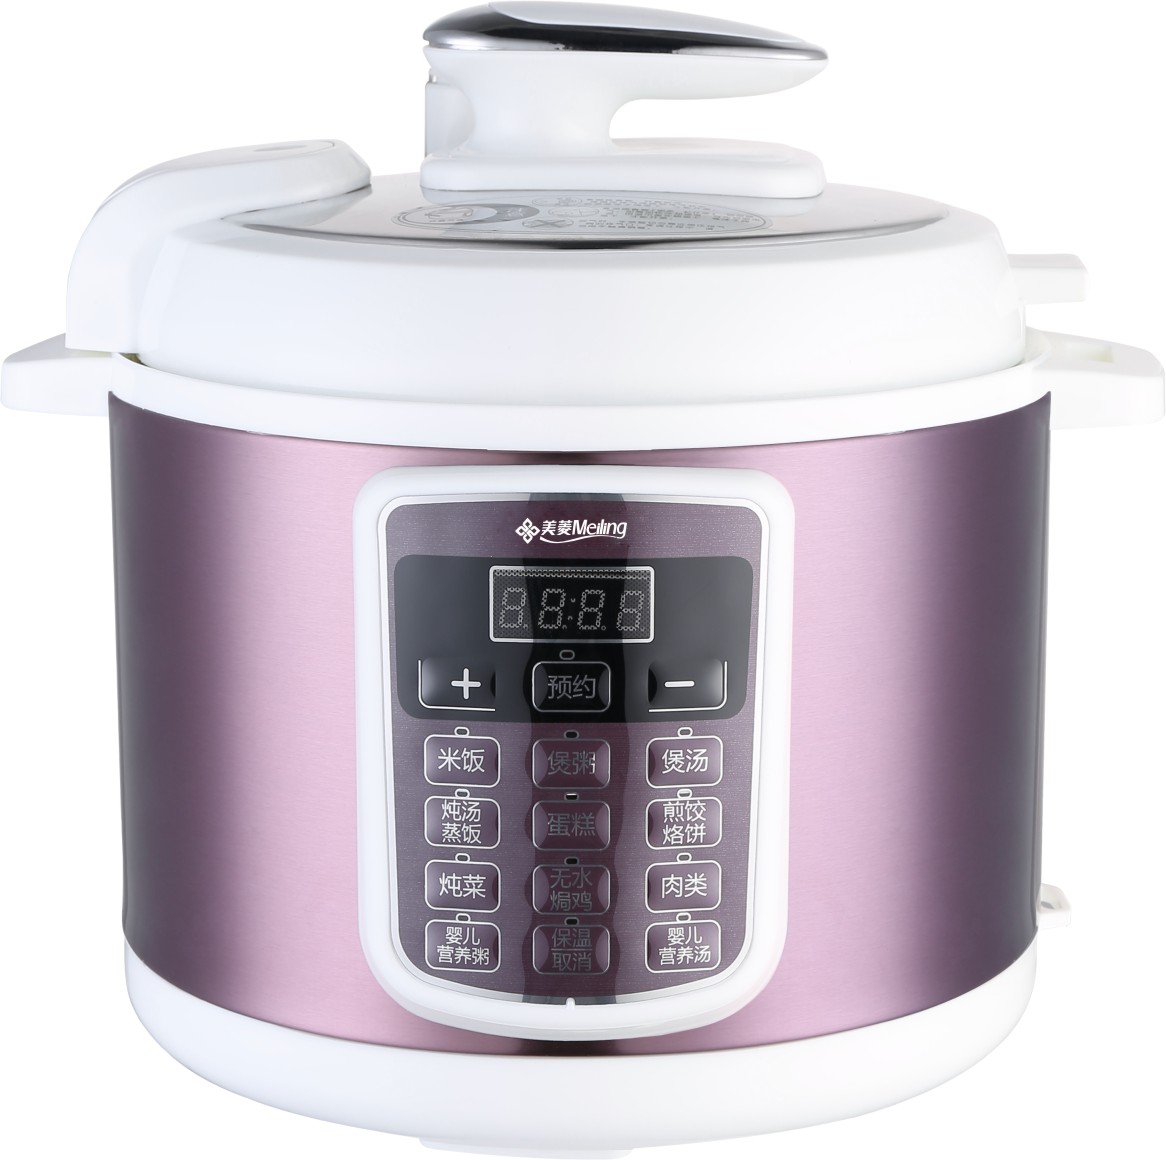 Multi function push button mechanical control electric pressure cooker with non-stick coating inner pot